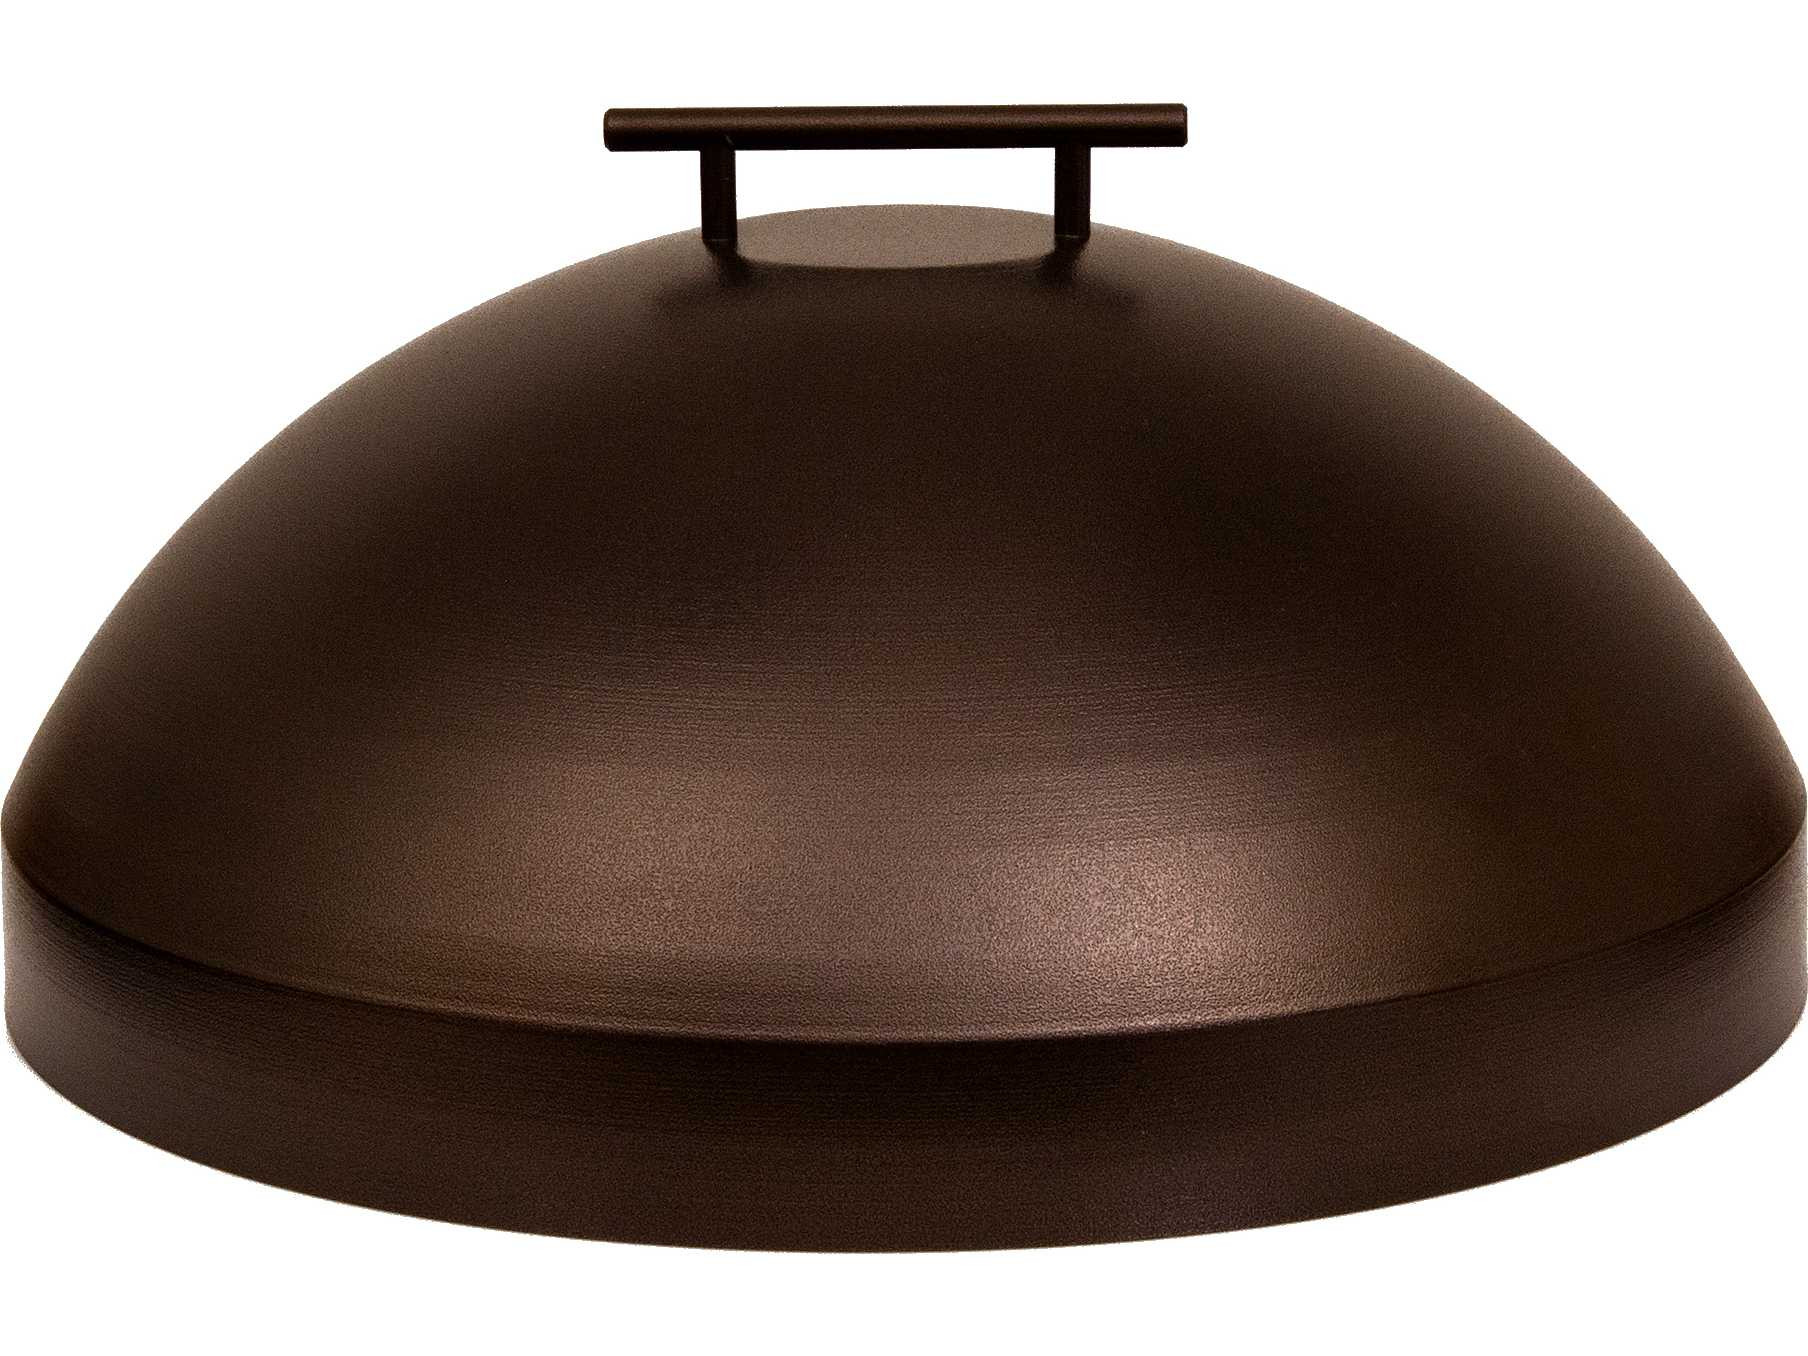 Round Firepit Cover
 OW Lee Casual Fireside Wrought Iron Round Burner 20 Fire